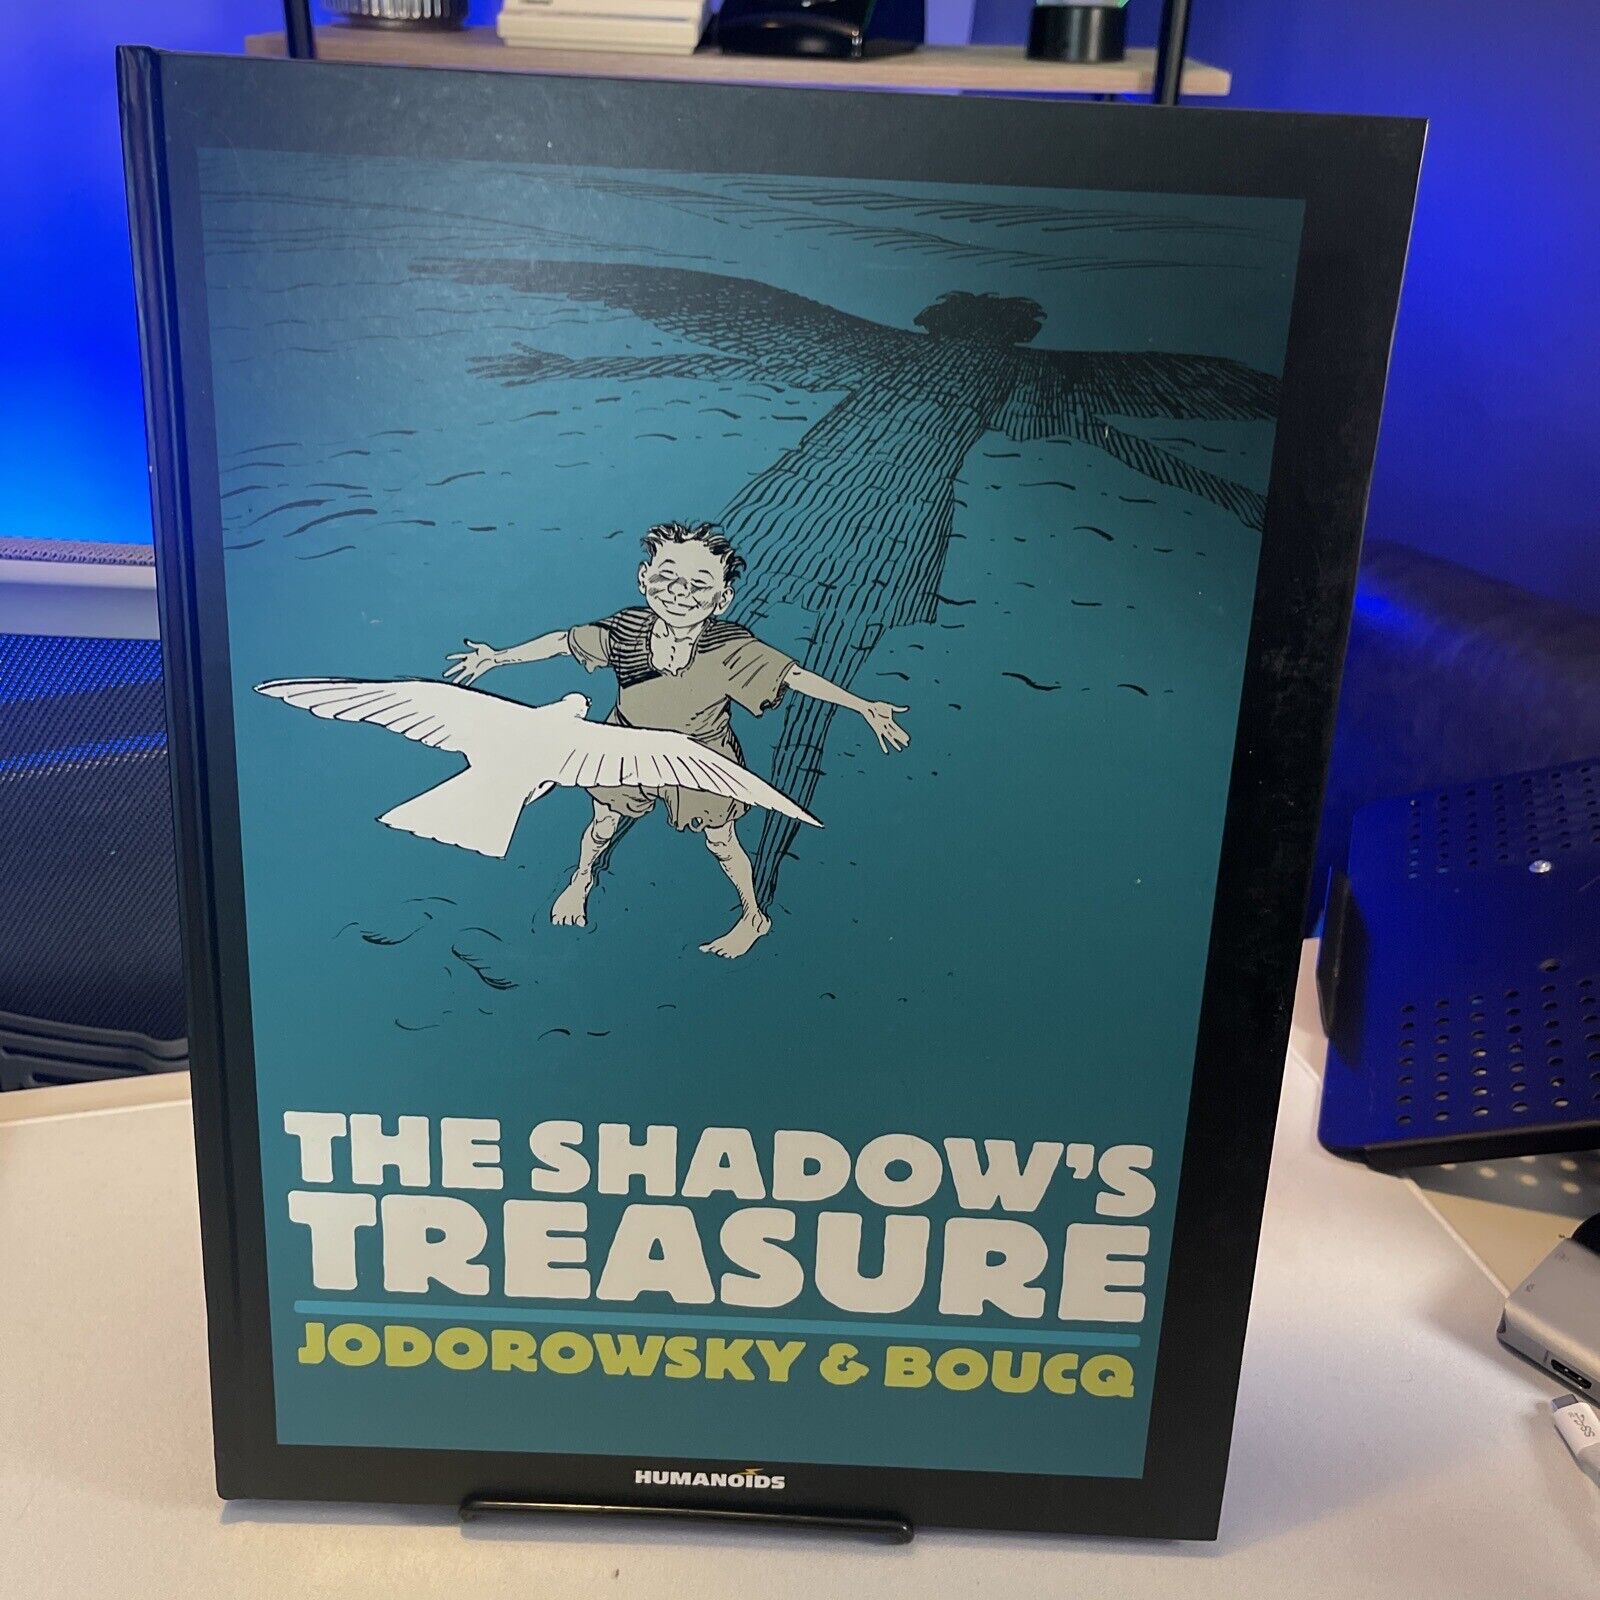 jodorowsky Boucq The Shadow’s Treasure Limited Edition Large Format 